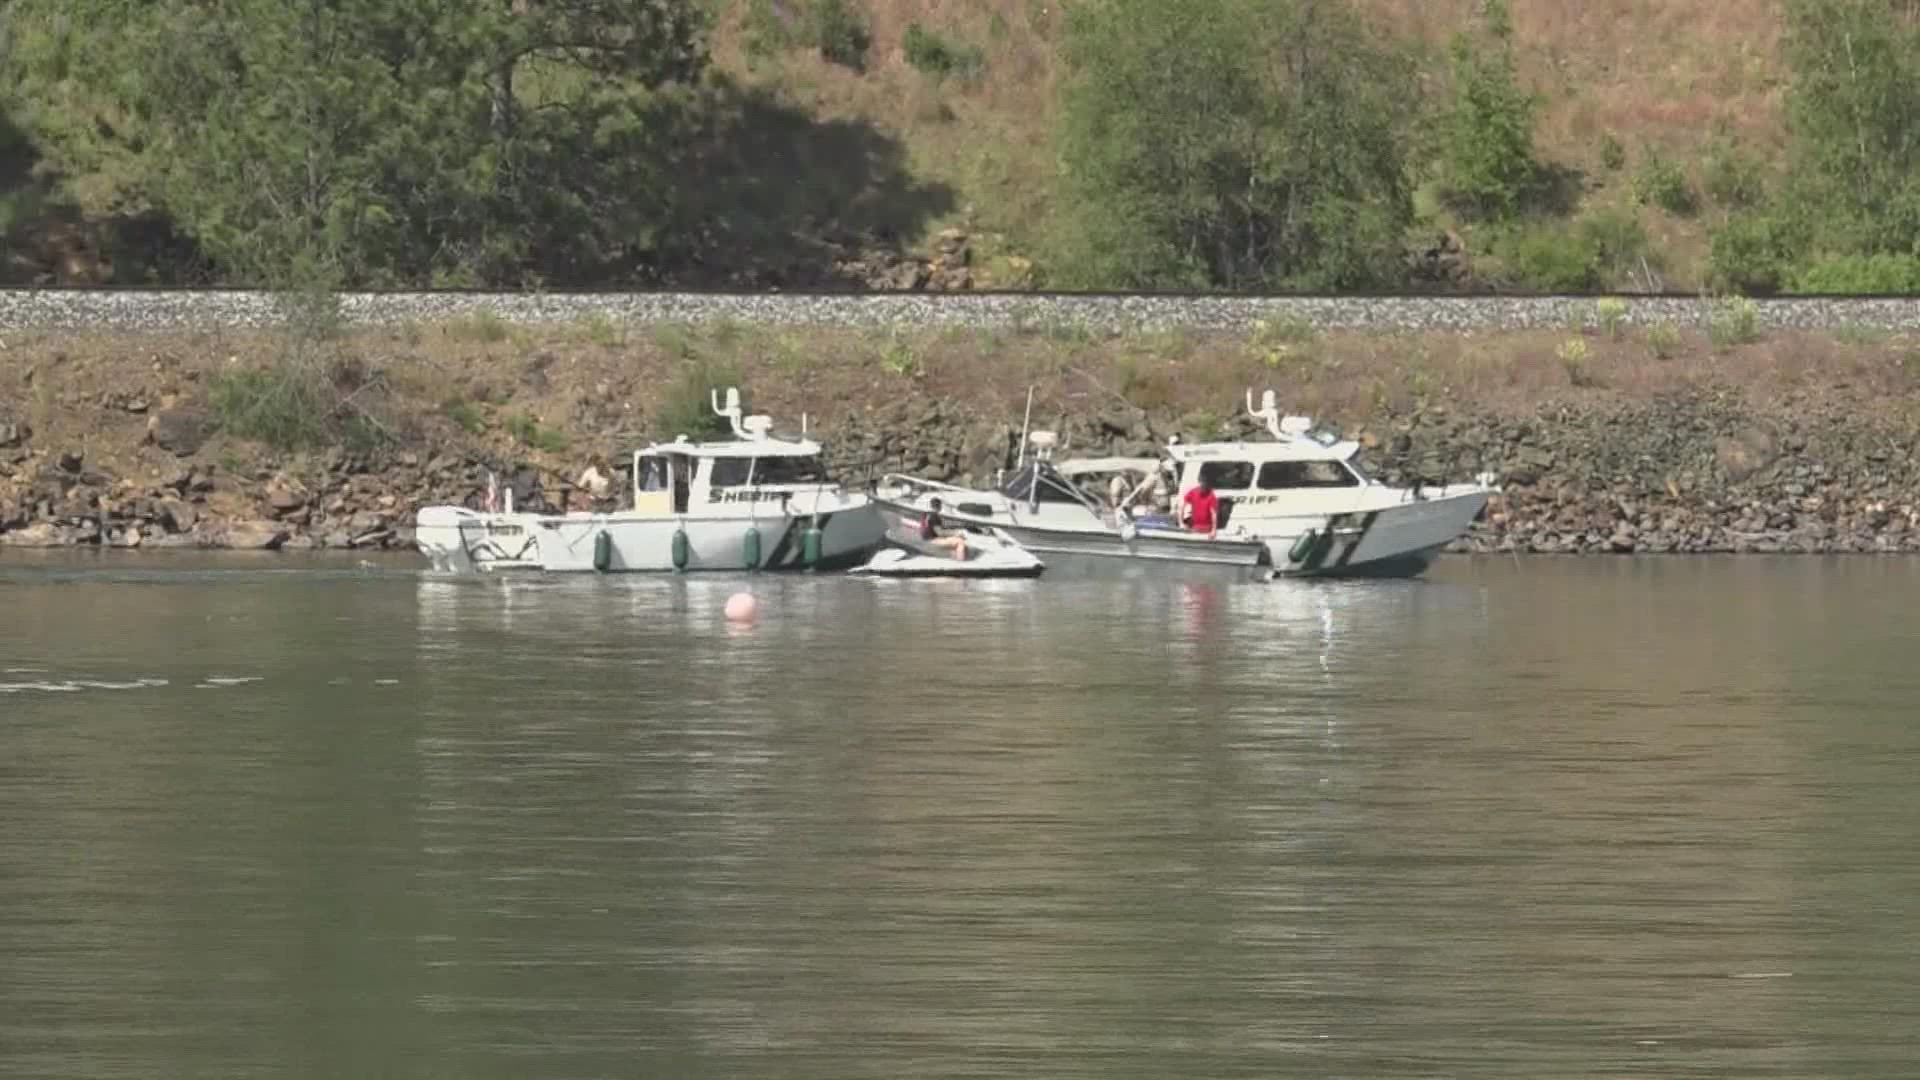 Bonner County Sheriff officials are still looking for three missing people after a Tuesday evening boat crash on the Pend Oreille river.